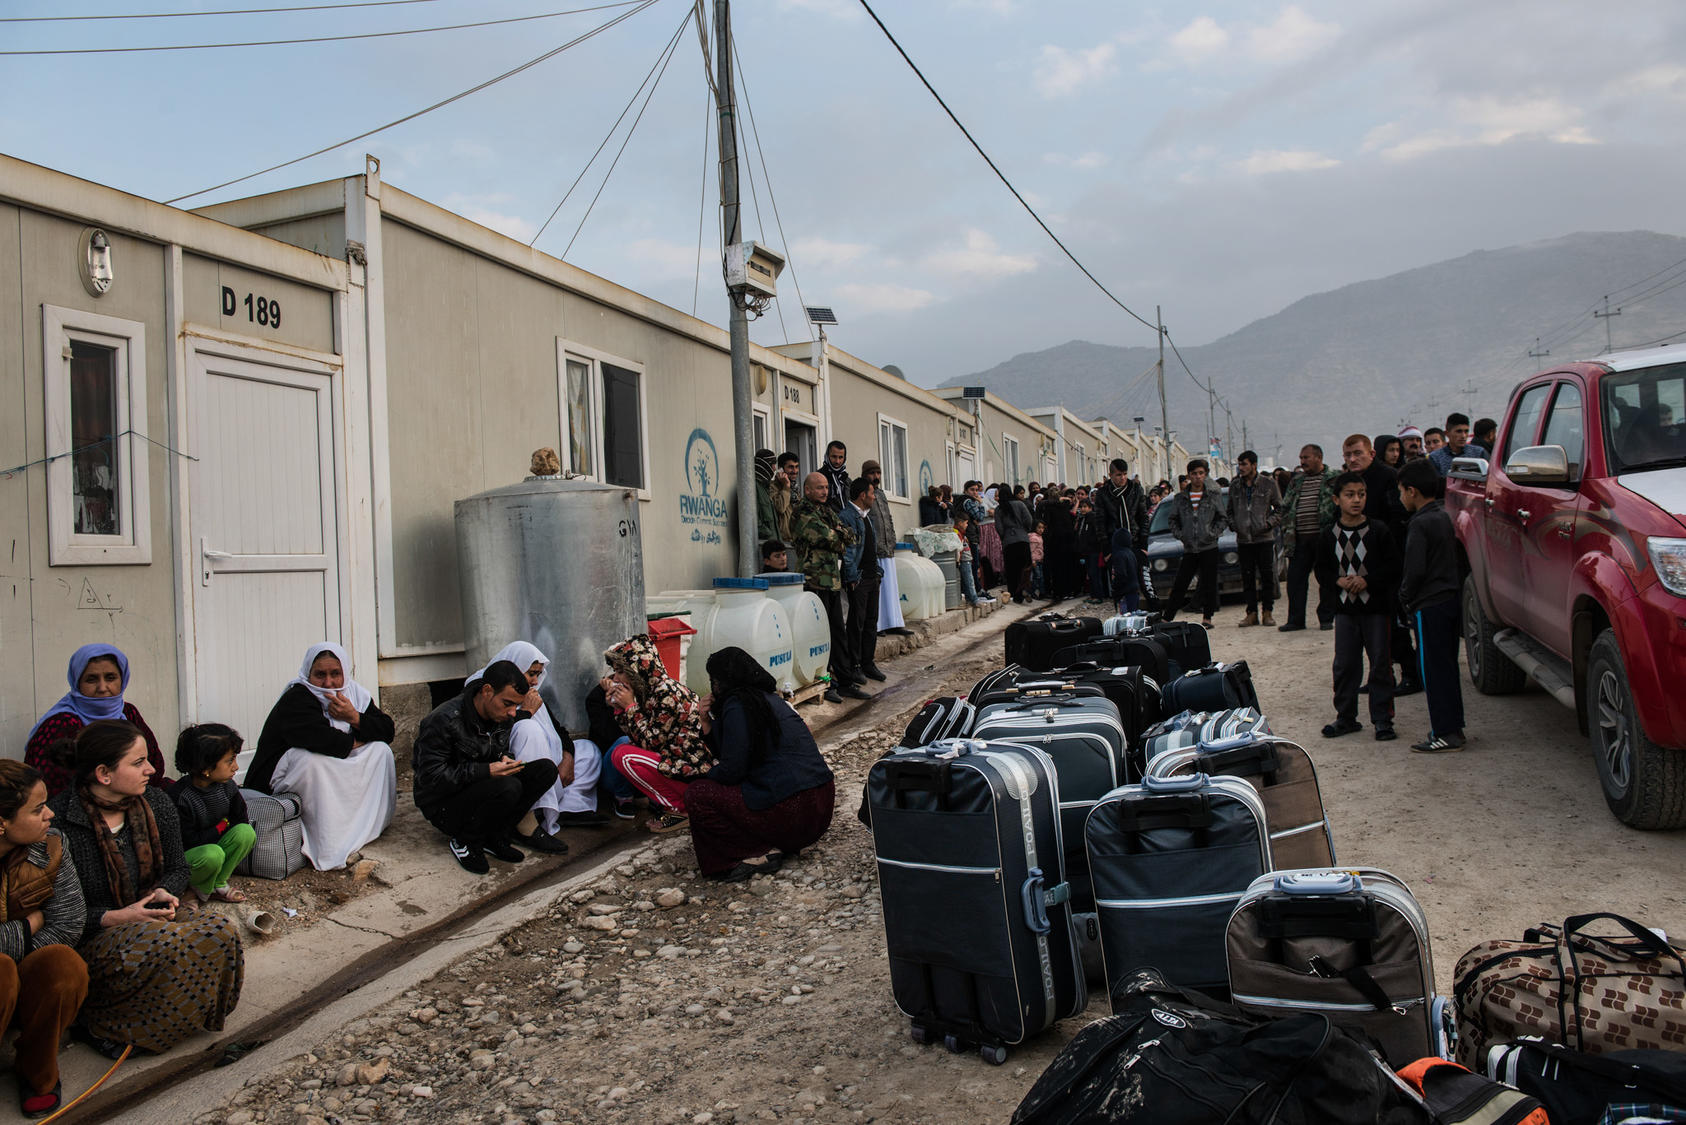 A camp for Yazidi refugees, some of whom were about to leave for resettlement in Germany, near Dohuk, Iraq, Jan. 24, 2016. Some of the women here had escaped sexual slavery at the hands of the Islamic State group, whose fighters routinely forced birth control upon them so that pregnancies would not disrupt the abuse. (Lynsey Addario/The New York Times)